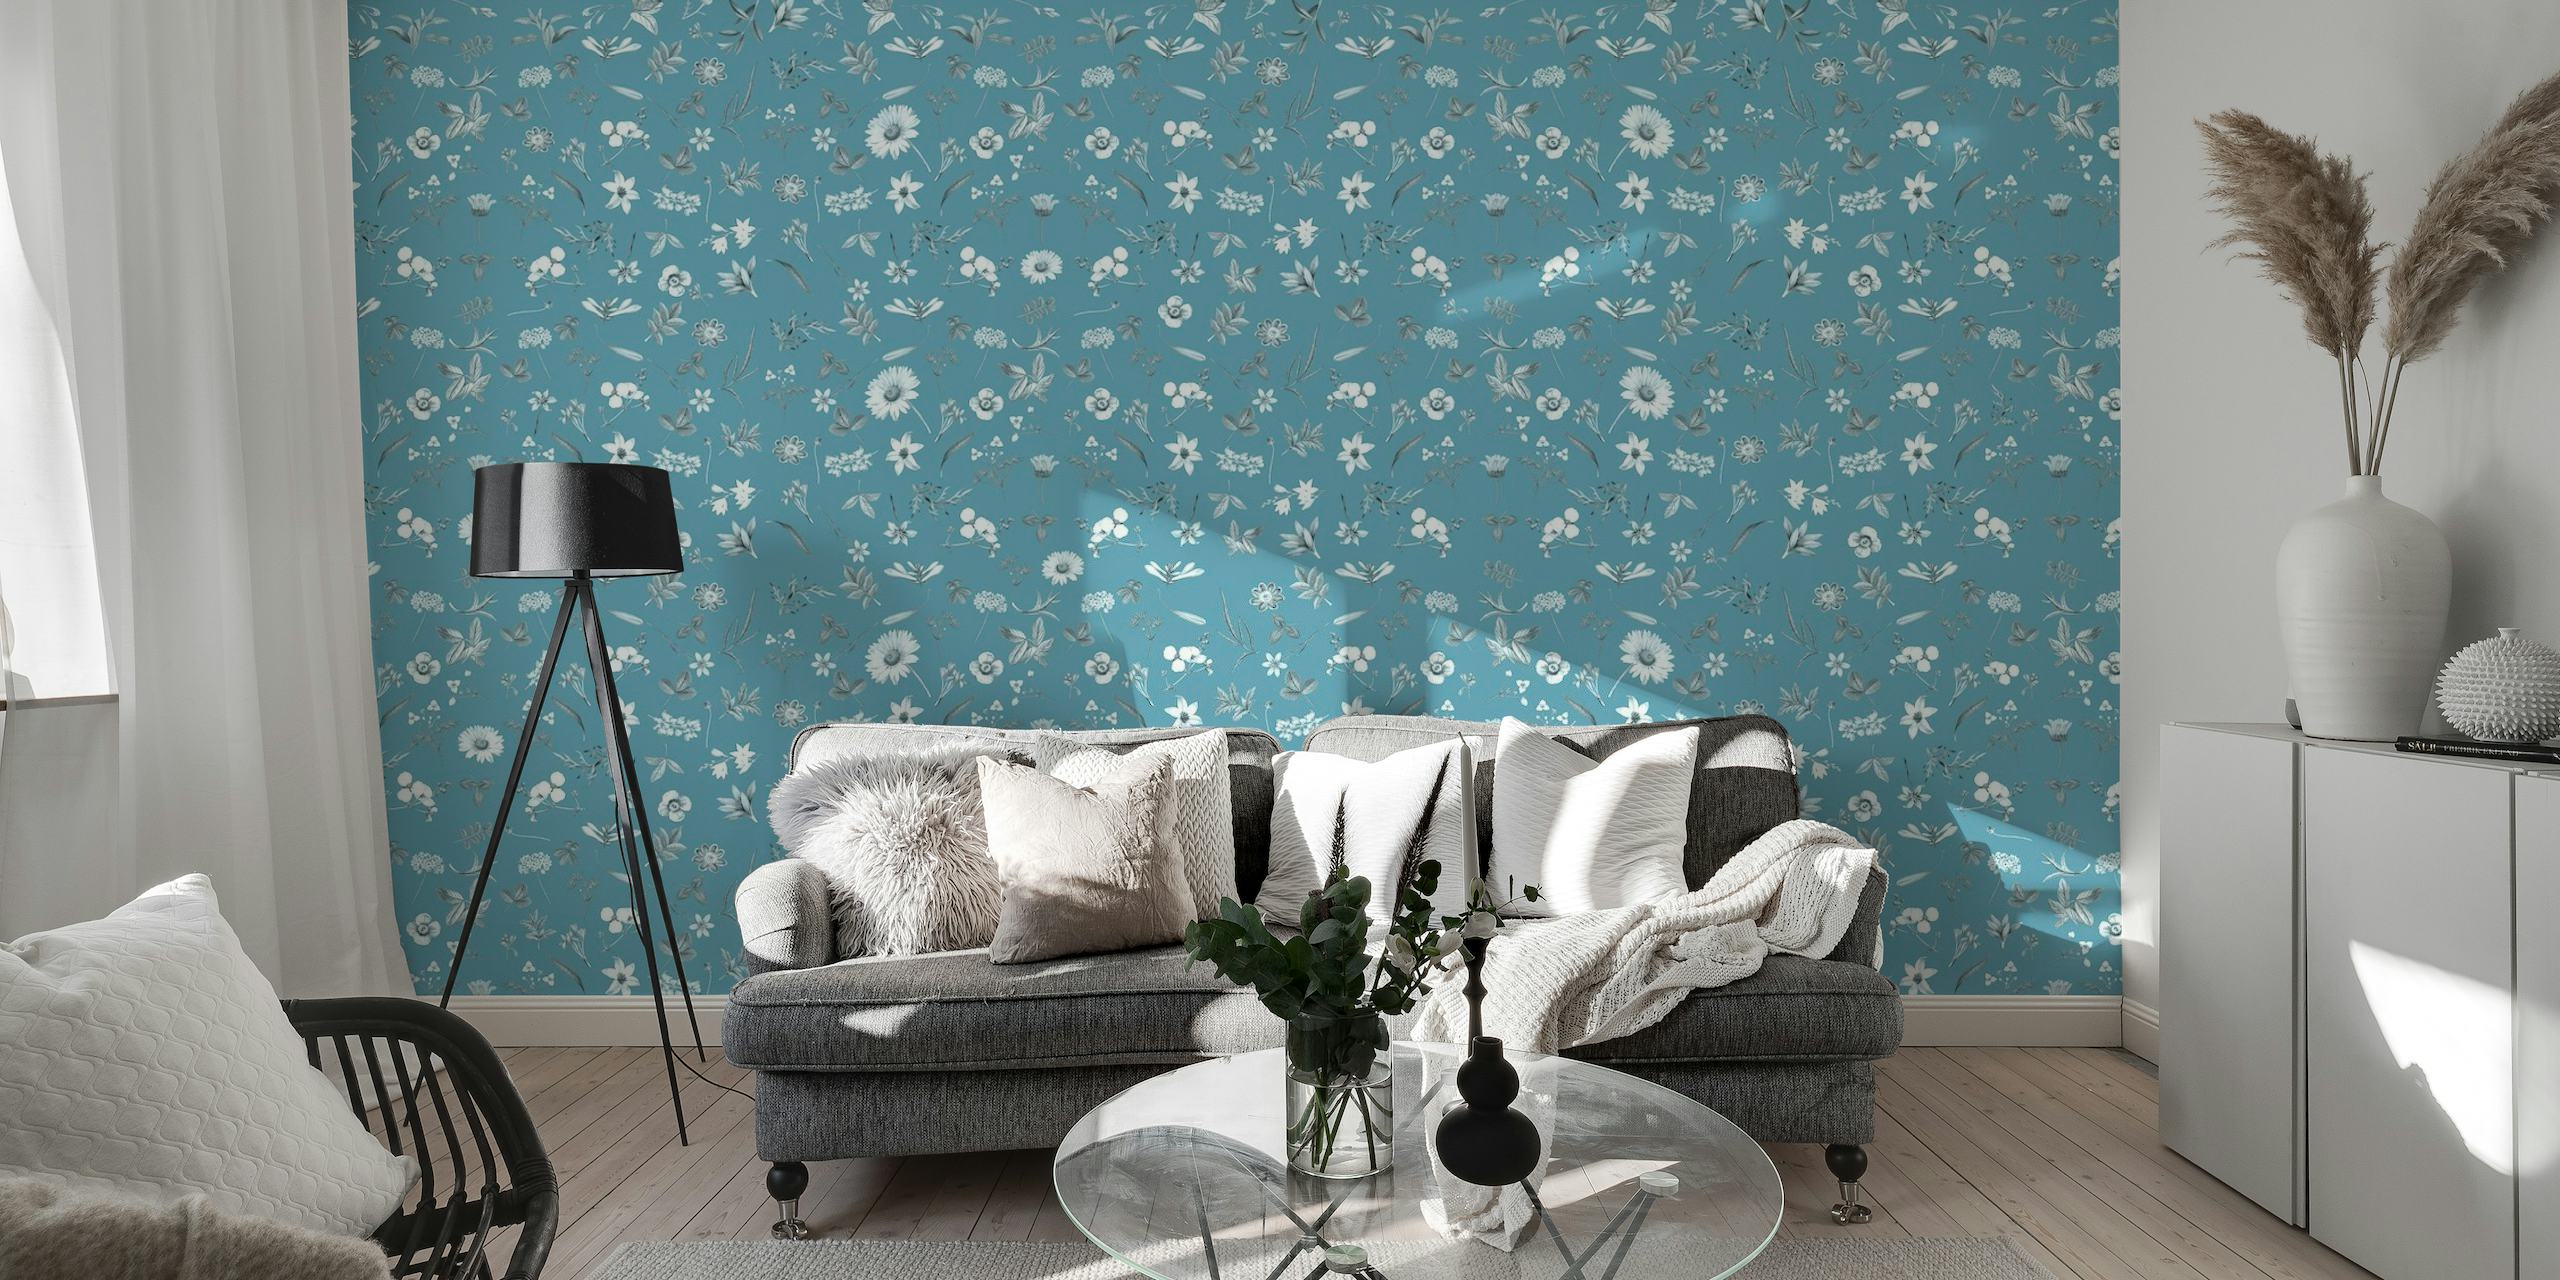 Blue floral pattern wall mural with calm and serene design